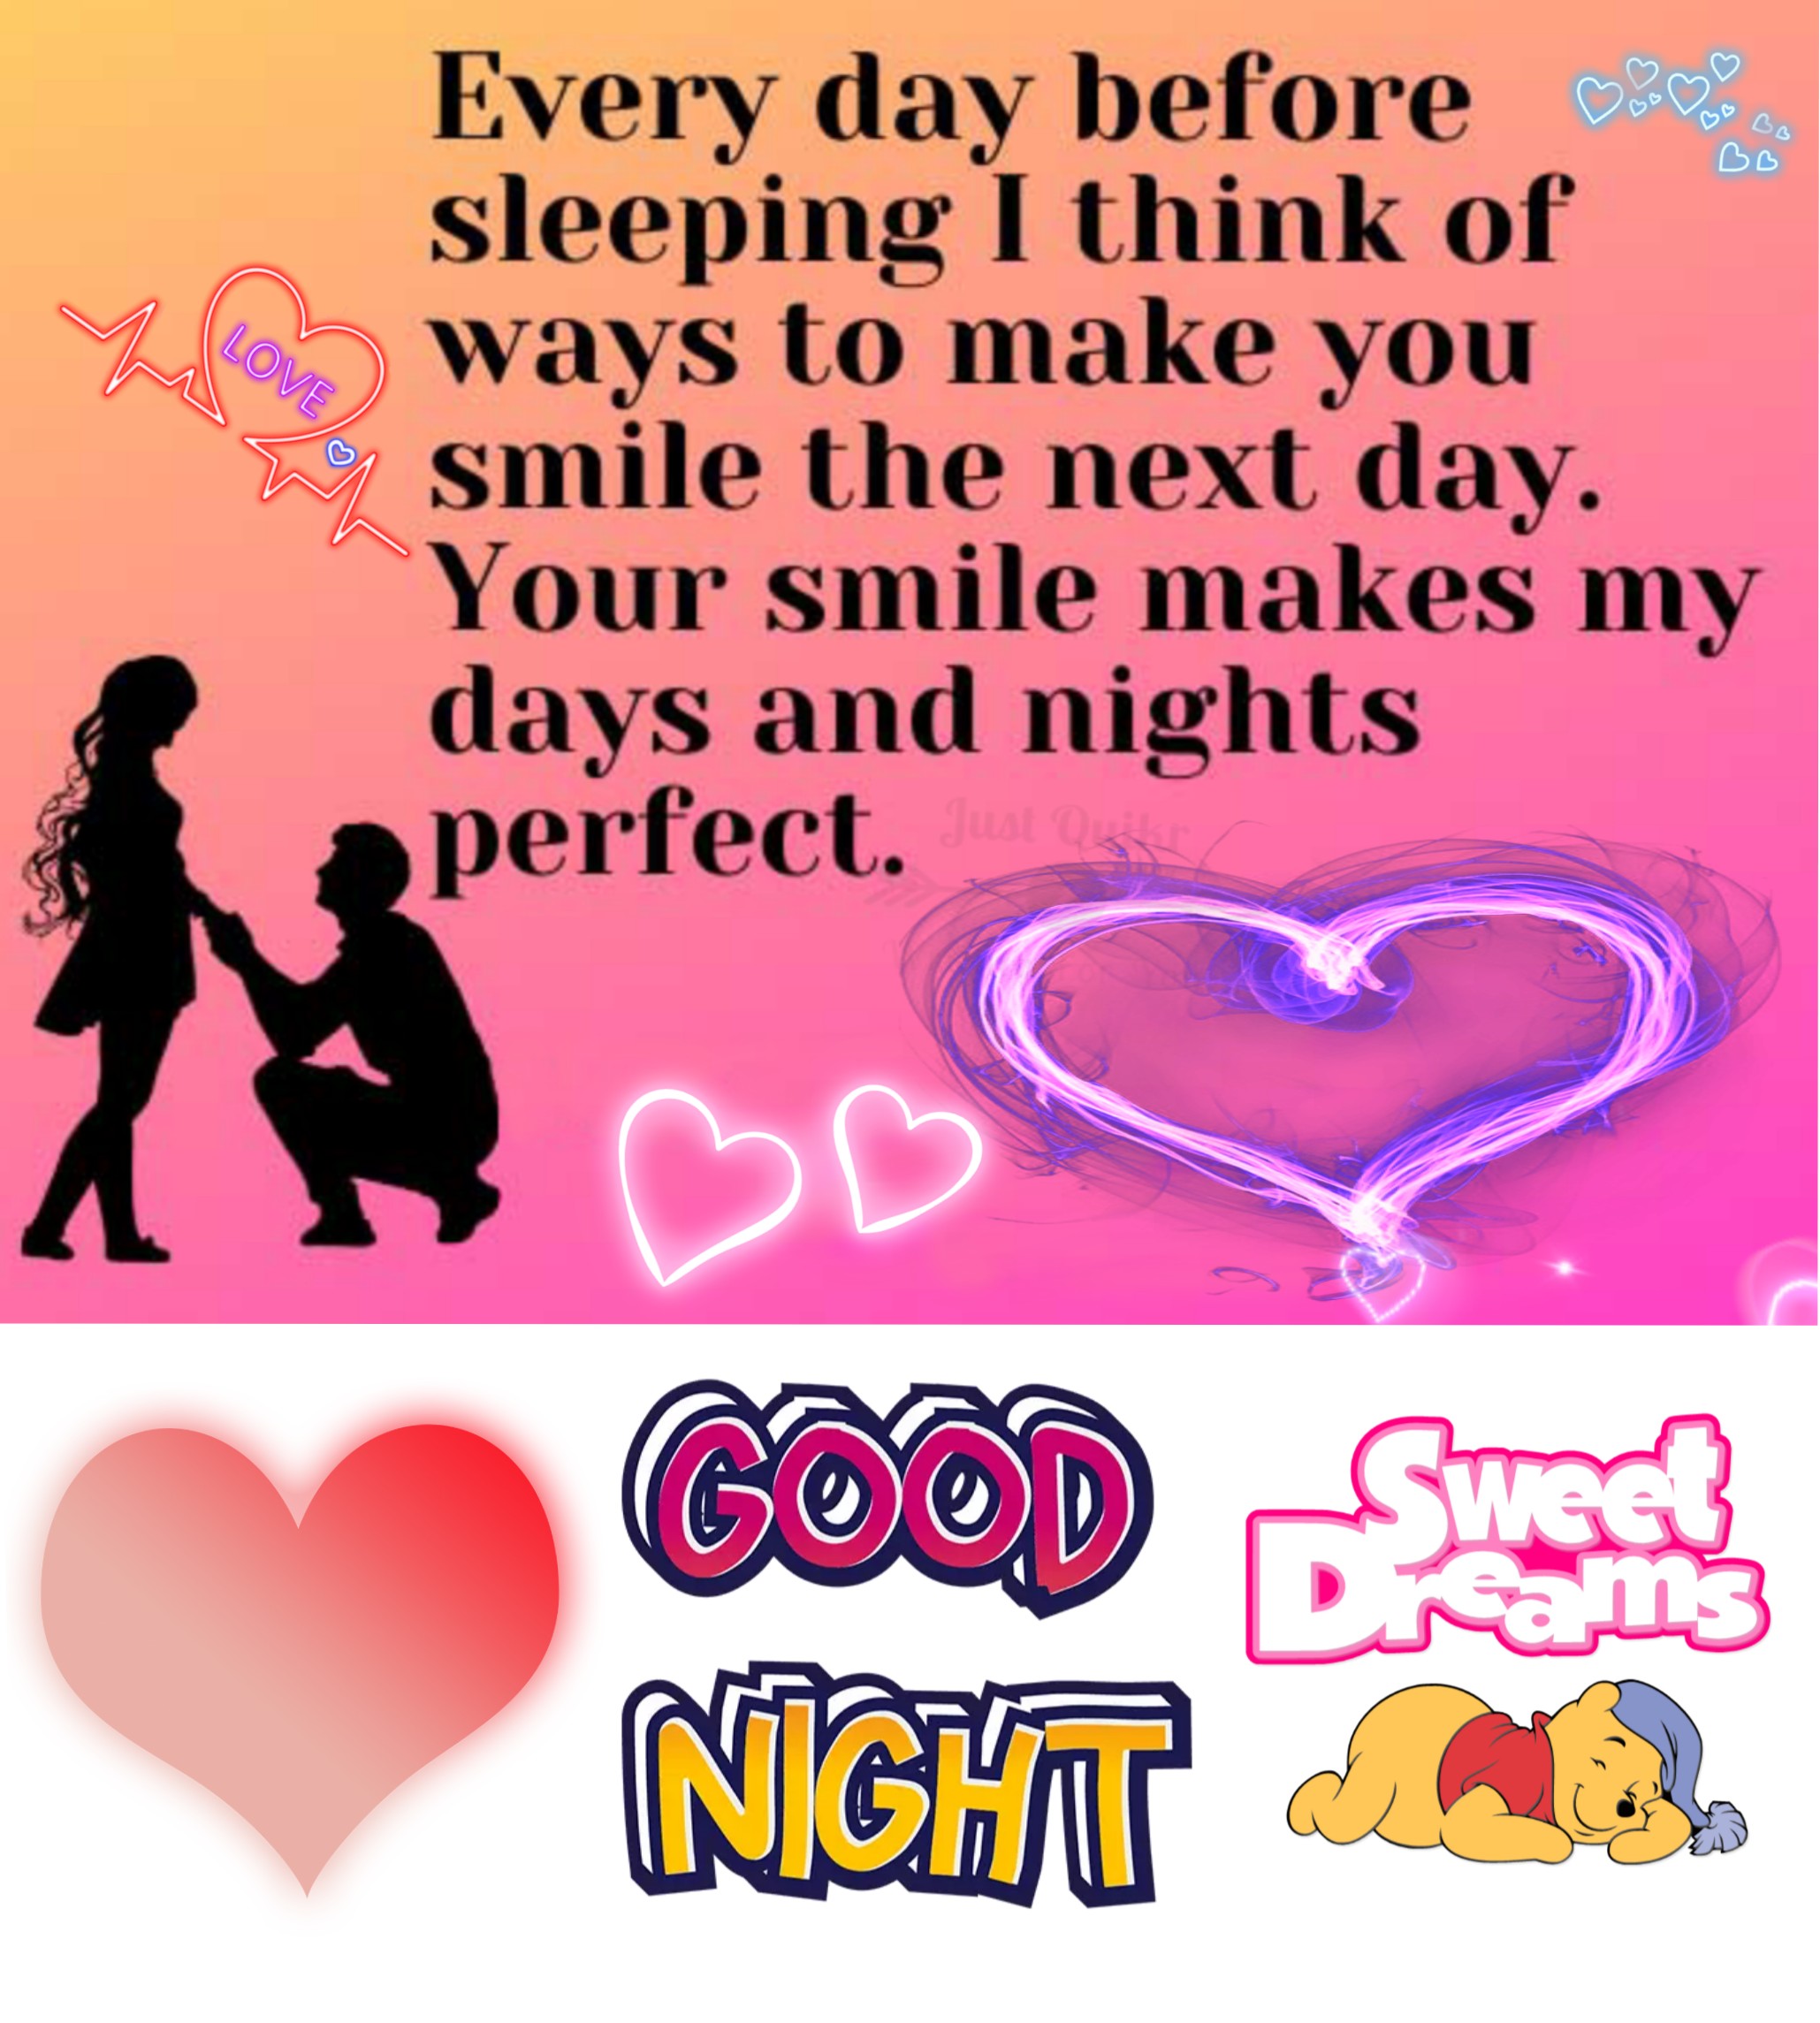 Good Night HD Pics Images For Her With Love